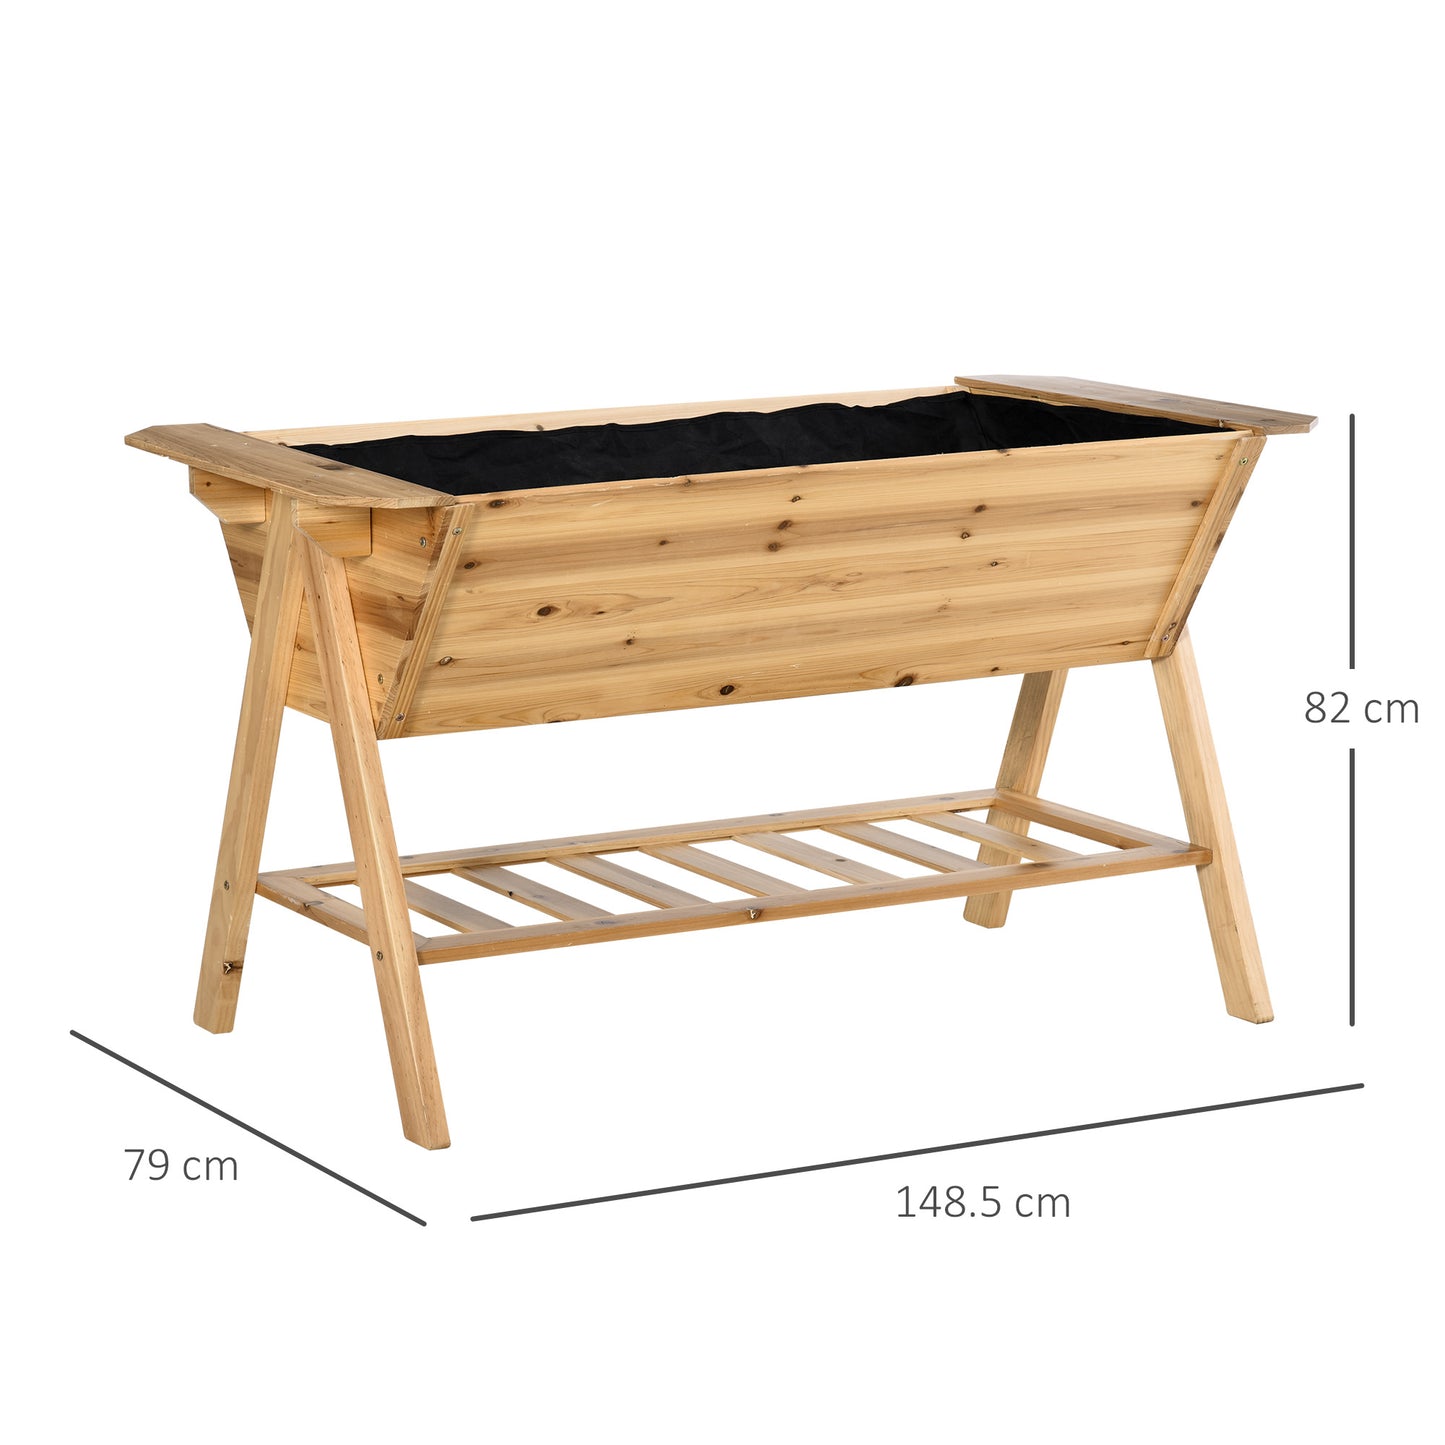 Outsunny Wooden Planter Garden Raised Bed Free Standing with Storage Shelf Plates